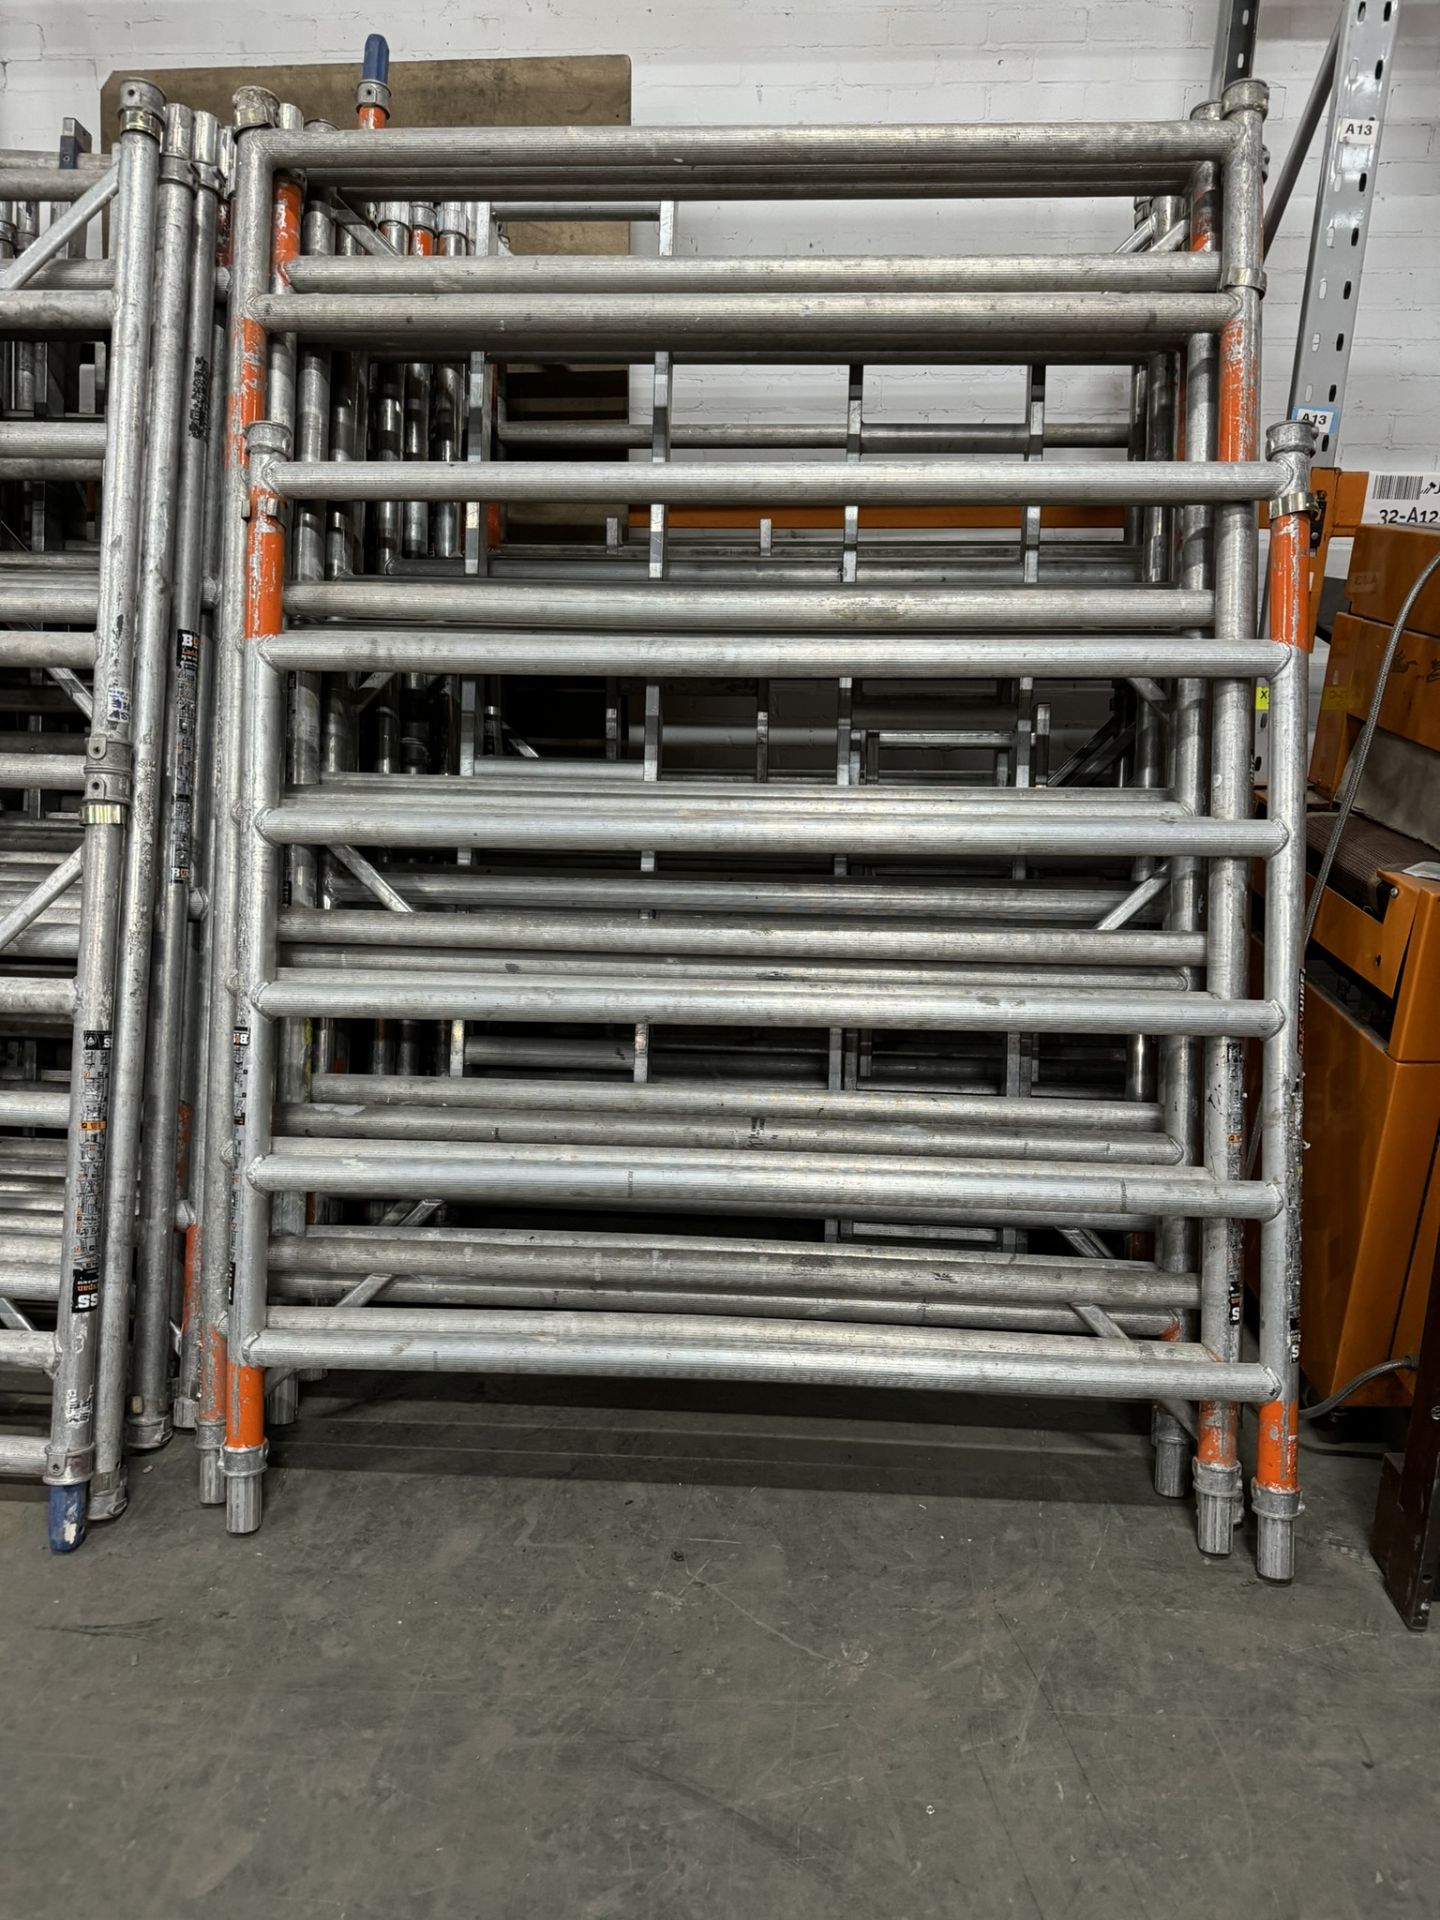 Large Quantity of Scaffolding - As per description and Photos